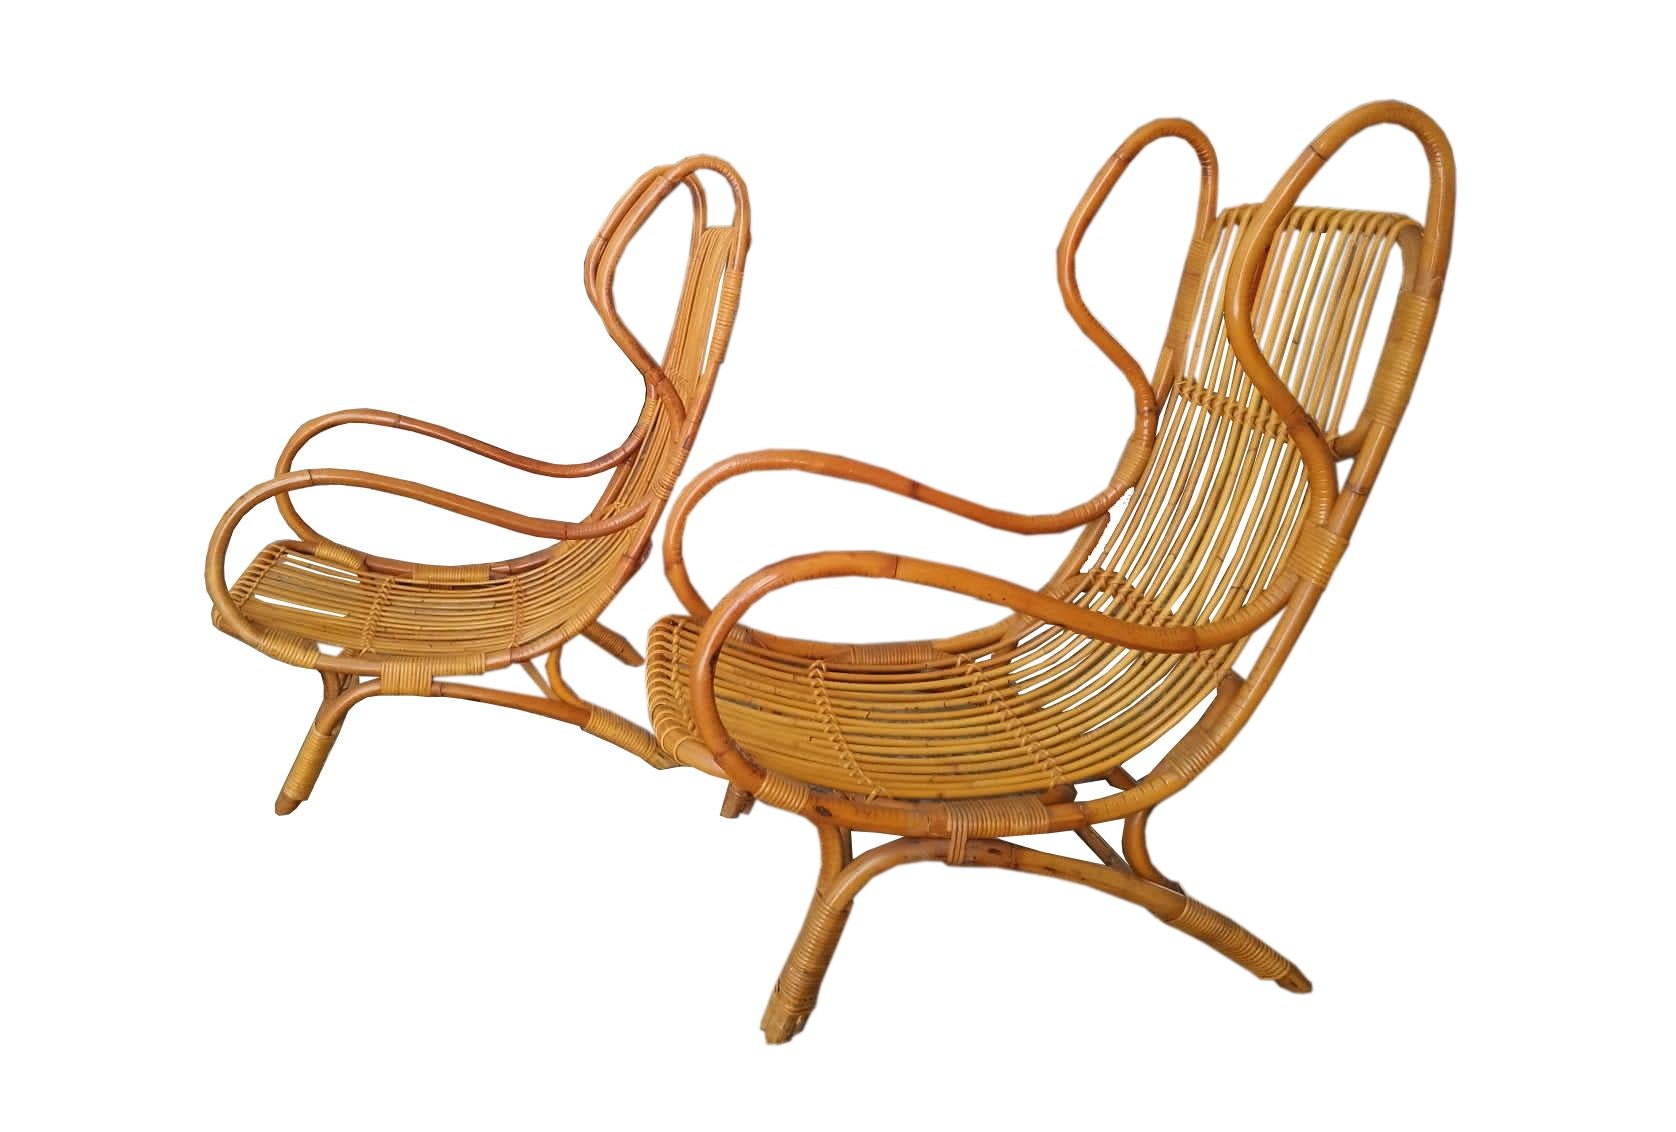 Gio Ponti for Bonacina Pair of Continuum BP 16 Lounge Chairs, Italy 1963 In Good Condition For Sale In Naples, IT